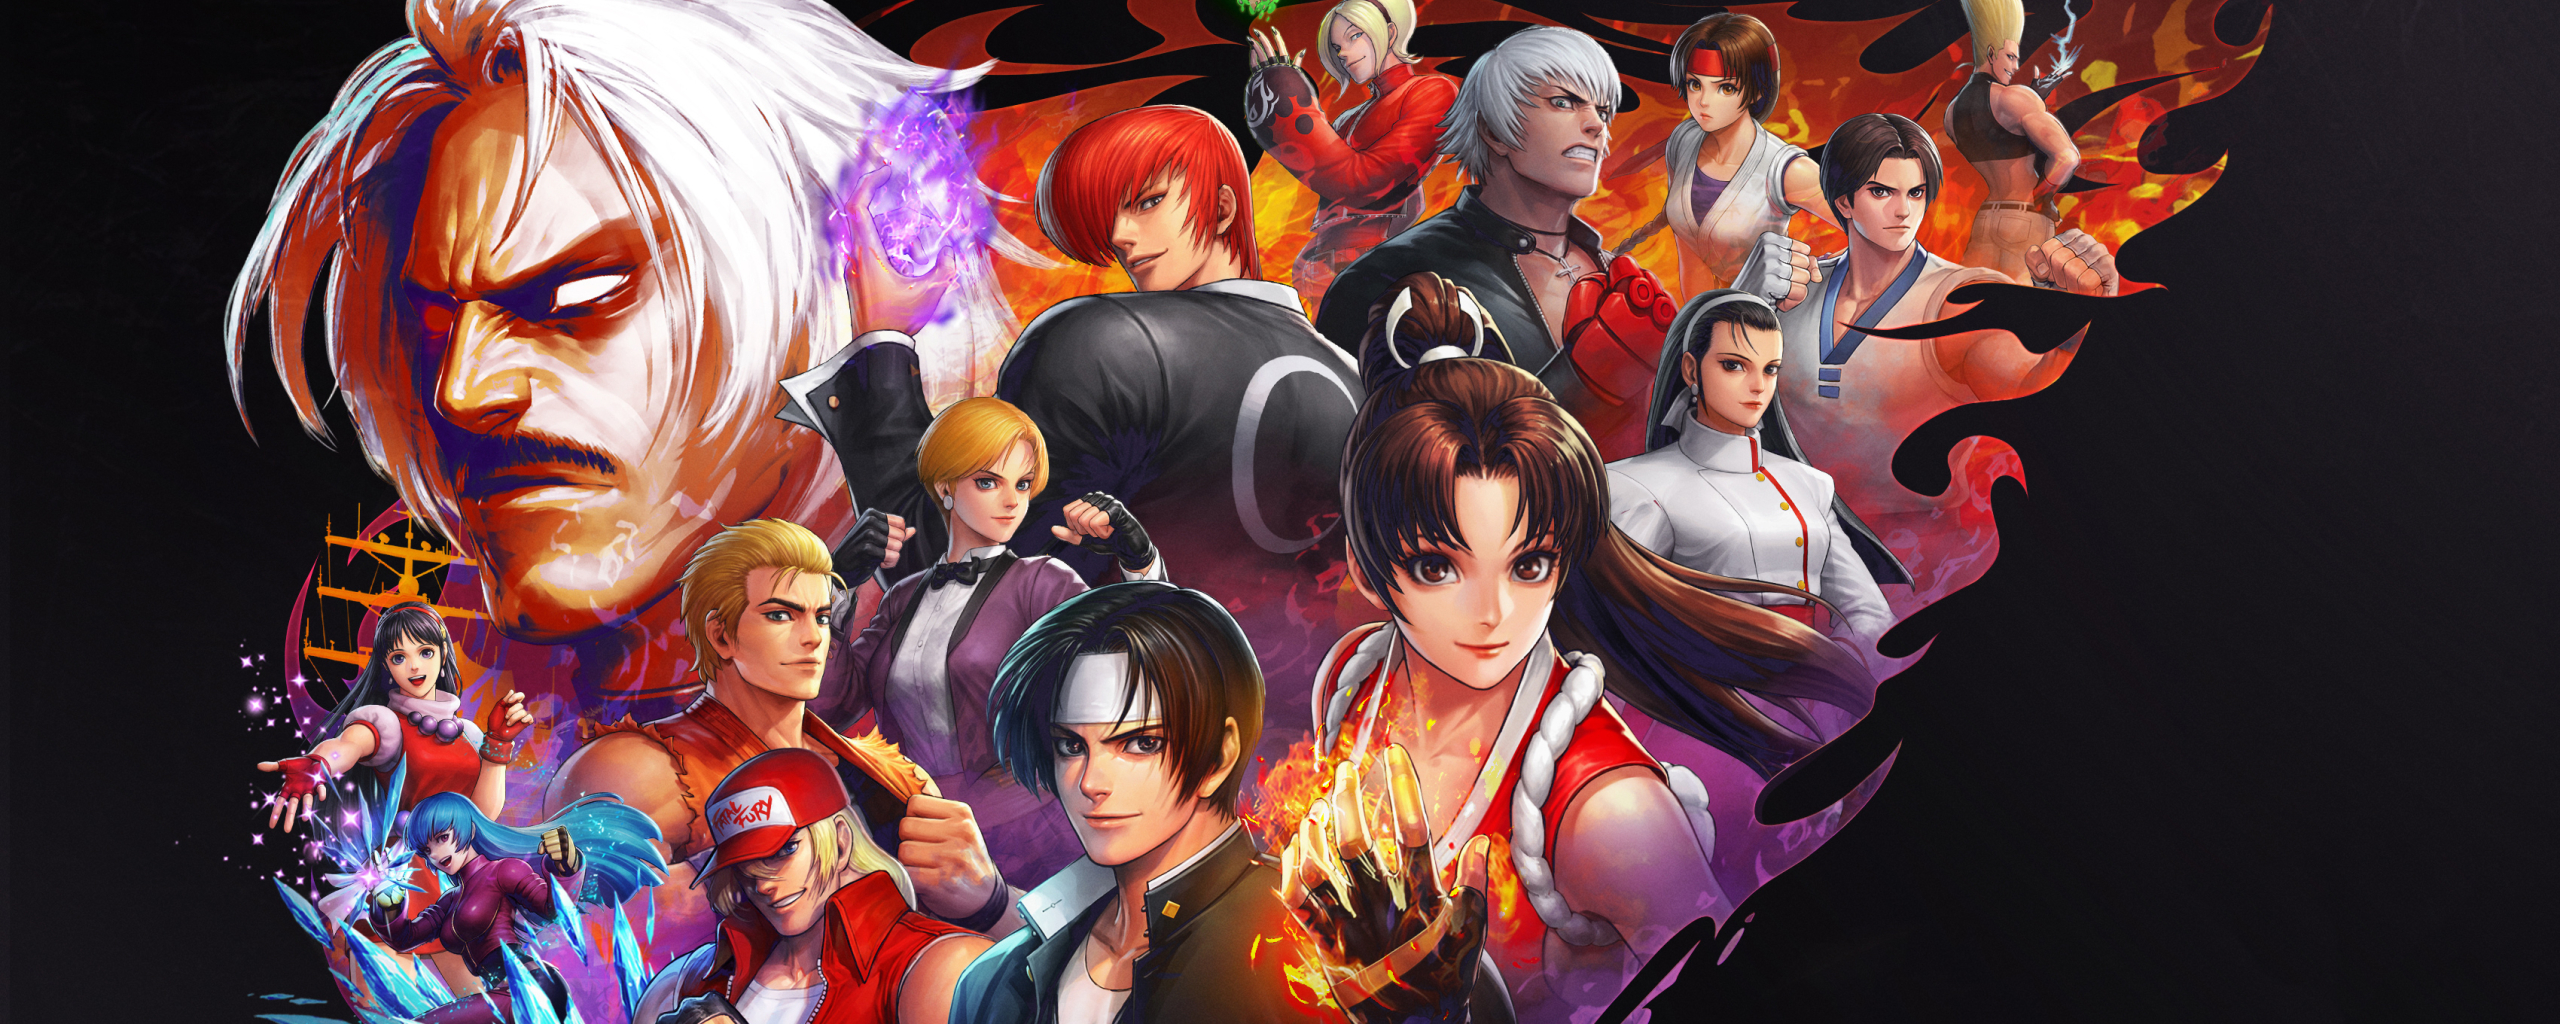 2560x1024 The King Of Fighters 2560x1024 Resolution ...